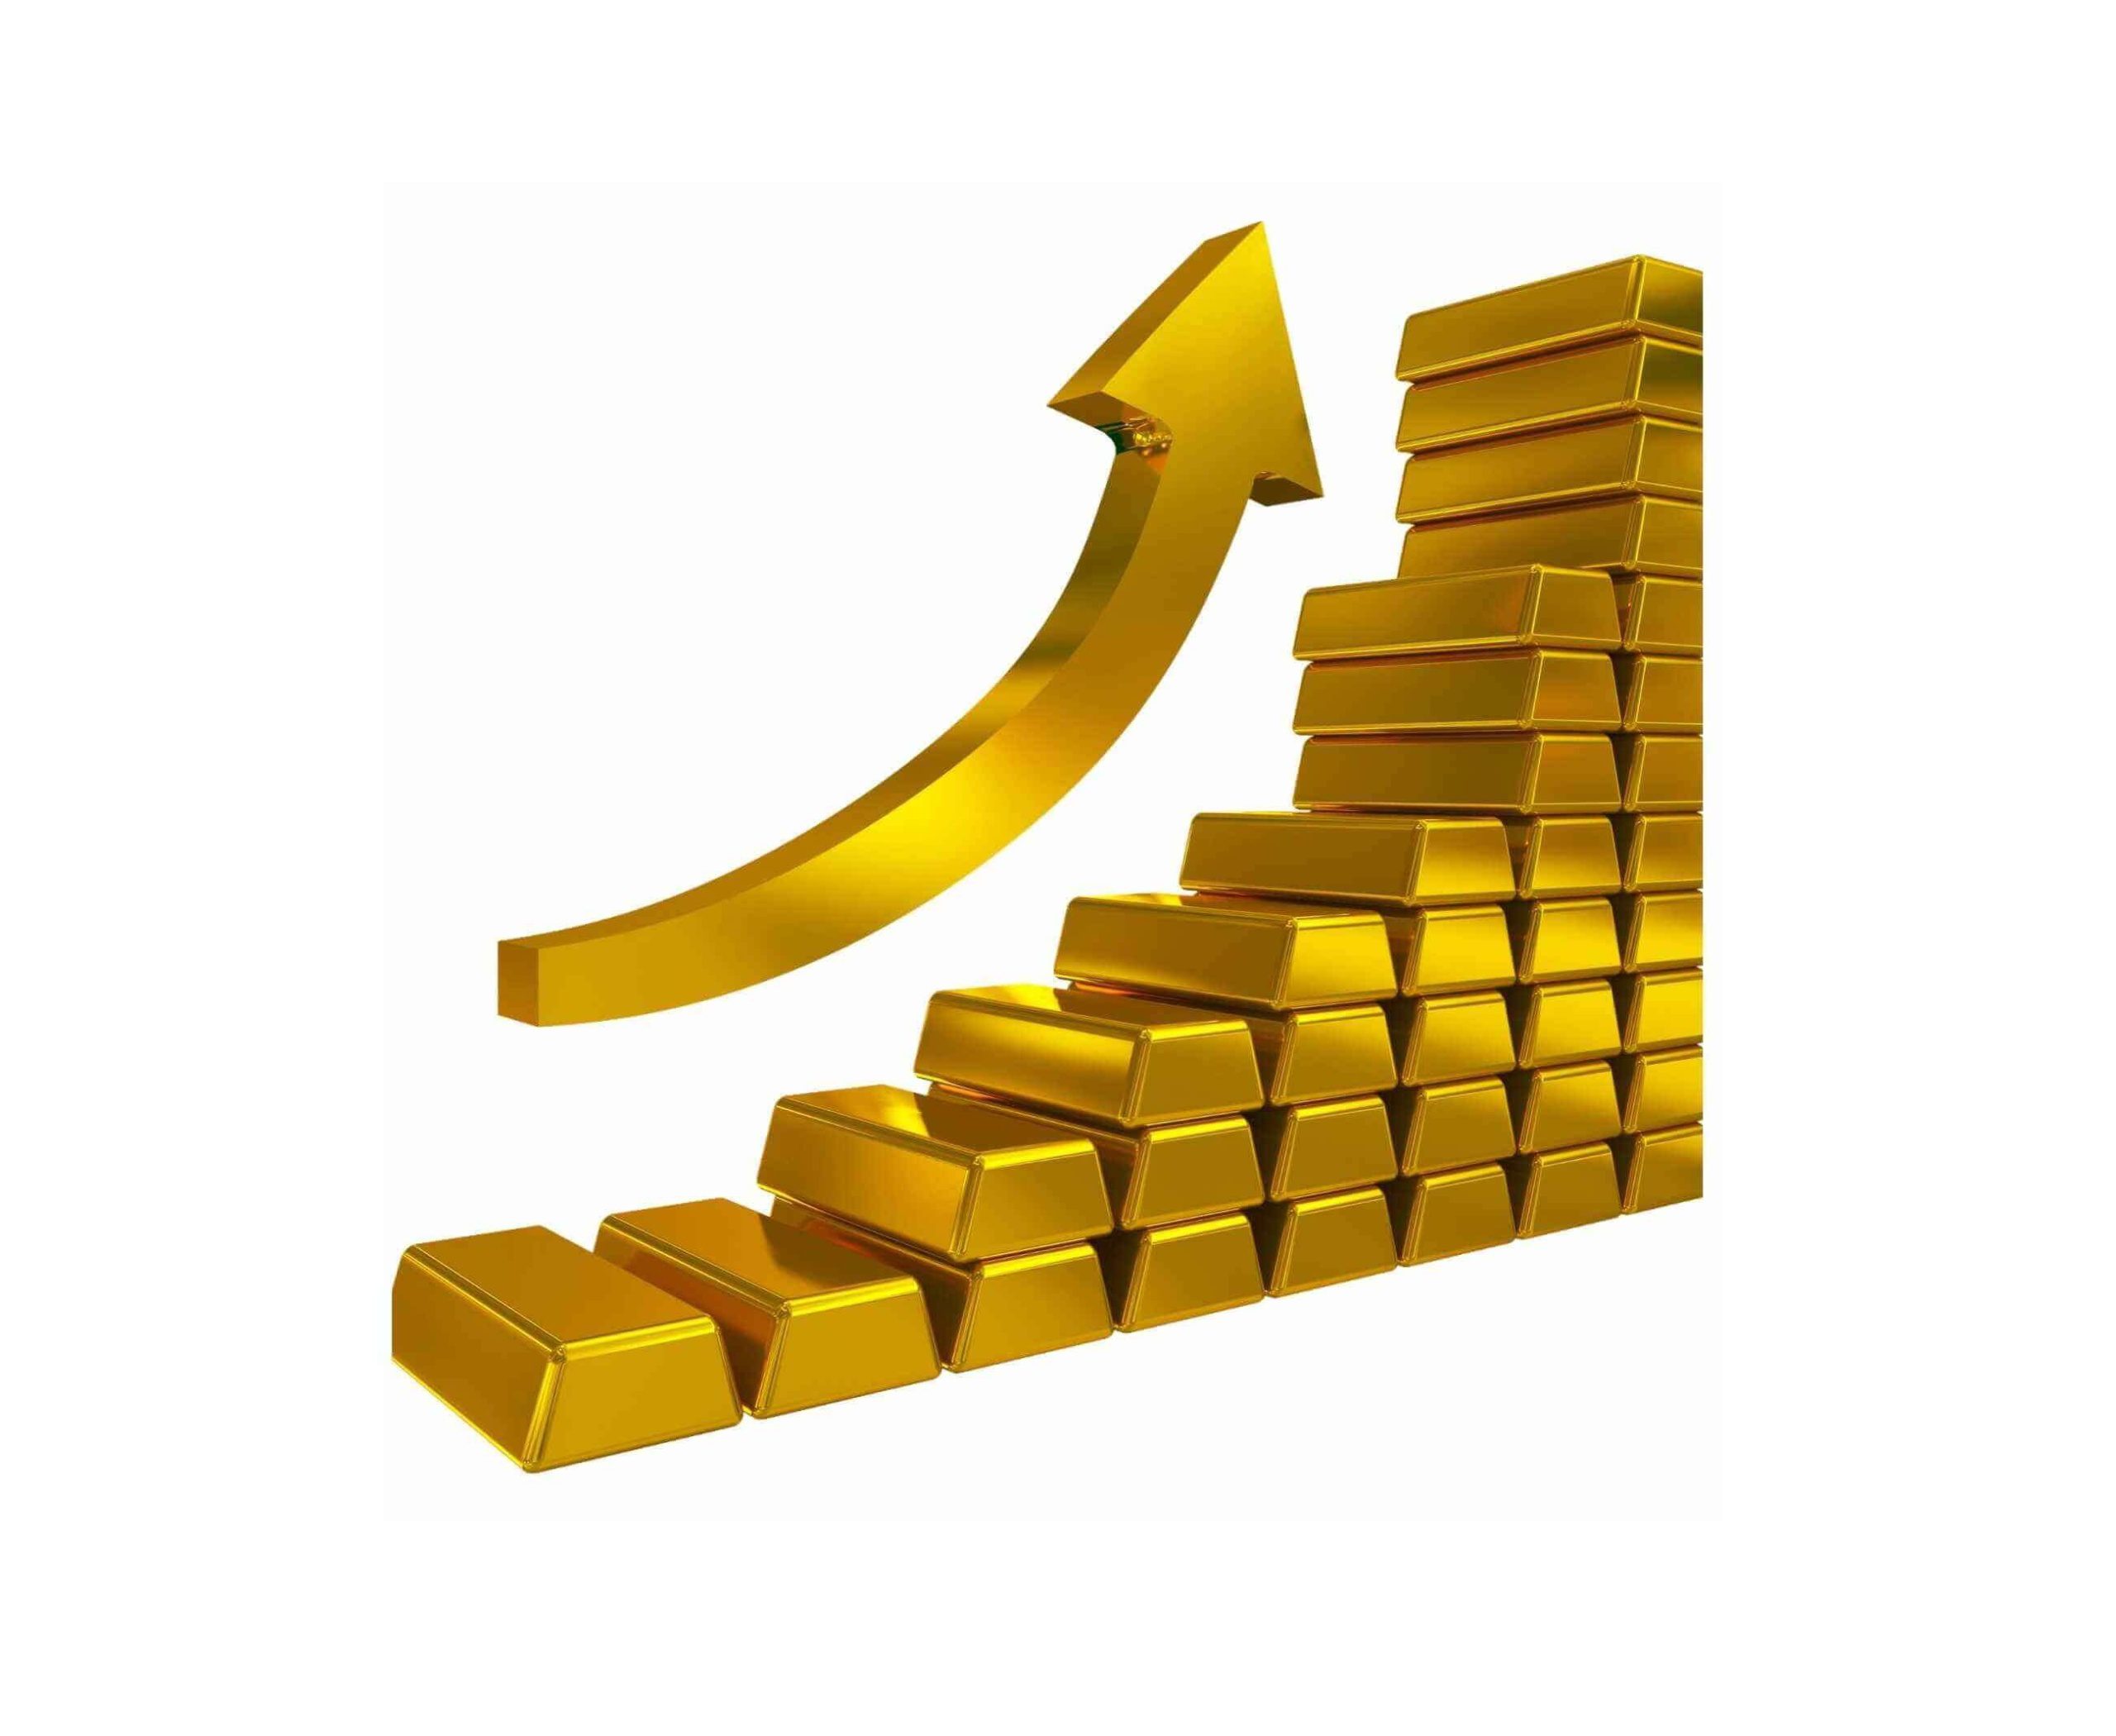 gold price rising now as gold bars in high demand following xauusd signal